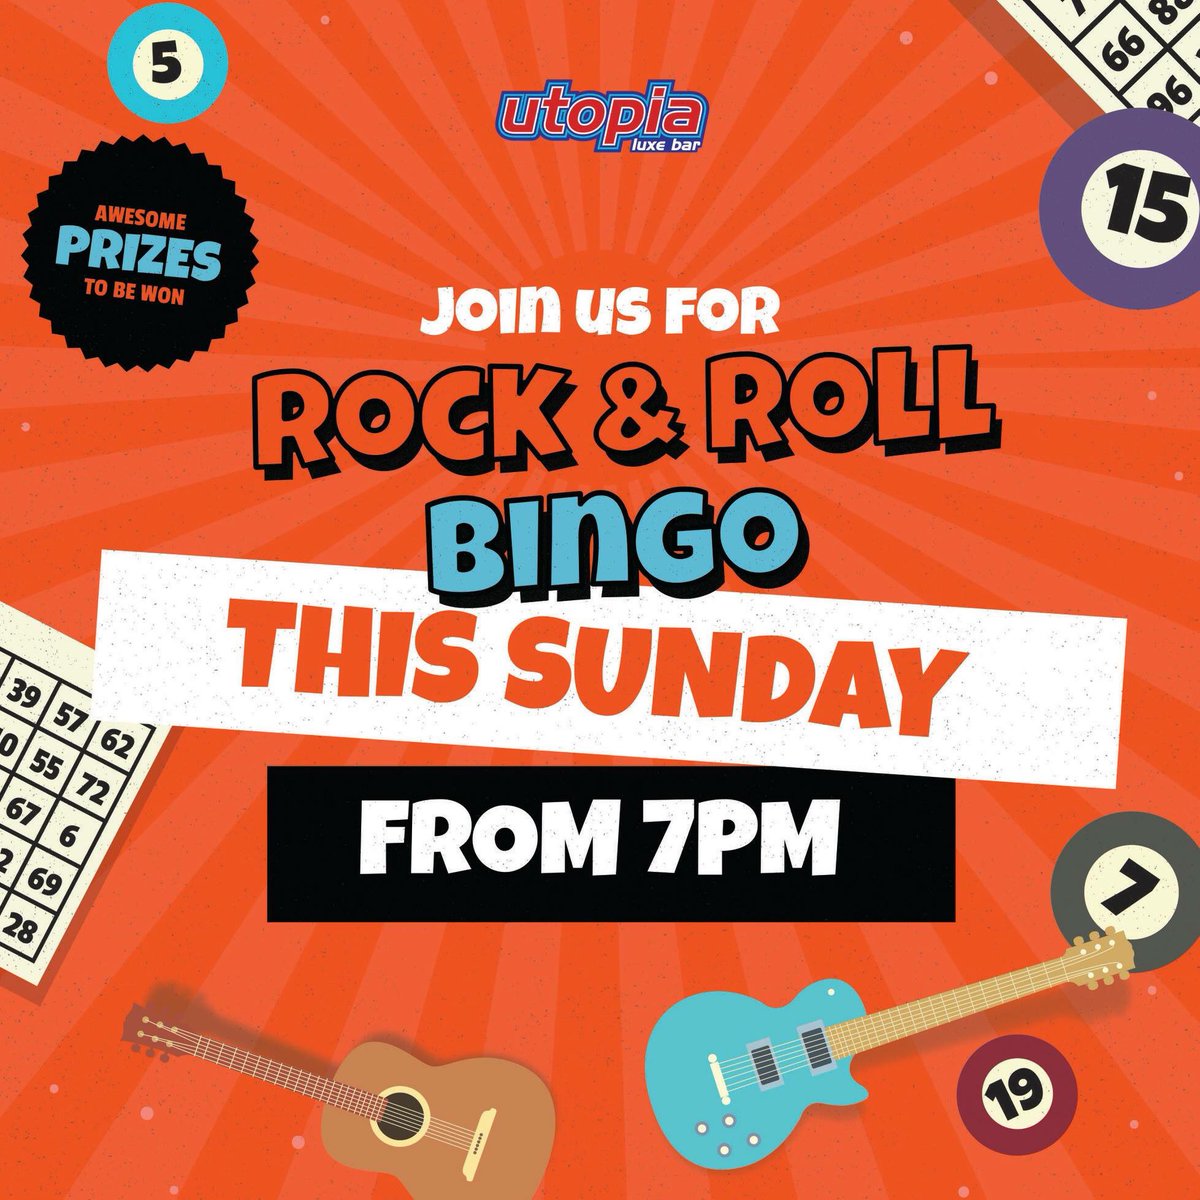 ROCK & ROLL BINGO IS BACK AT UTOPIA! 🙌🏼😍🎤🎸

After a hugely successful first R&R Bingo, it's back at Utopia this Sunday from 7pm! 🍻🔥

Expect a load of fun filled prizes to be won... 

See you ALL on Sunday!

#RockandRollBingo #Utopia